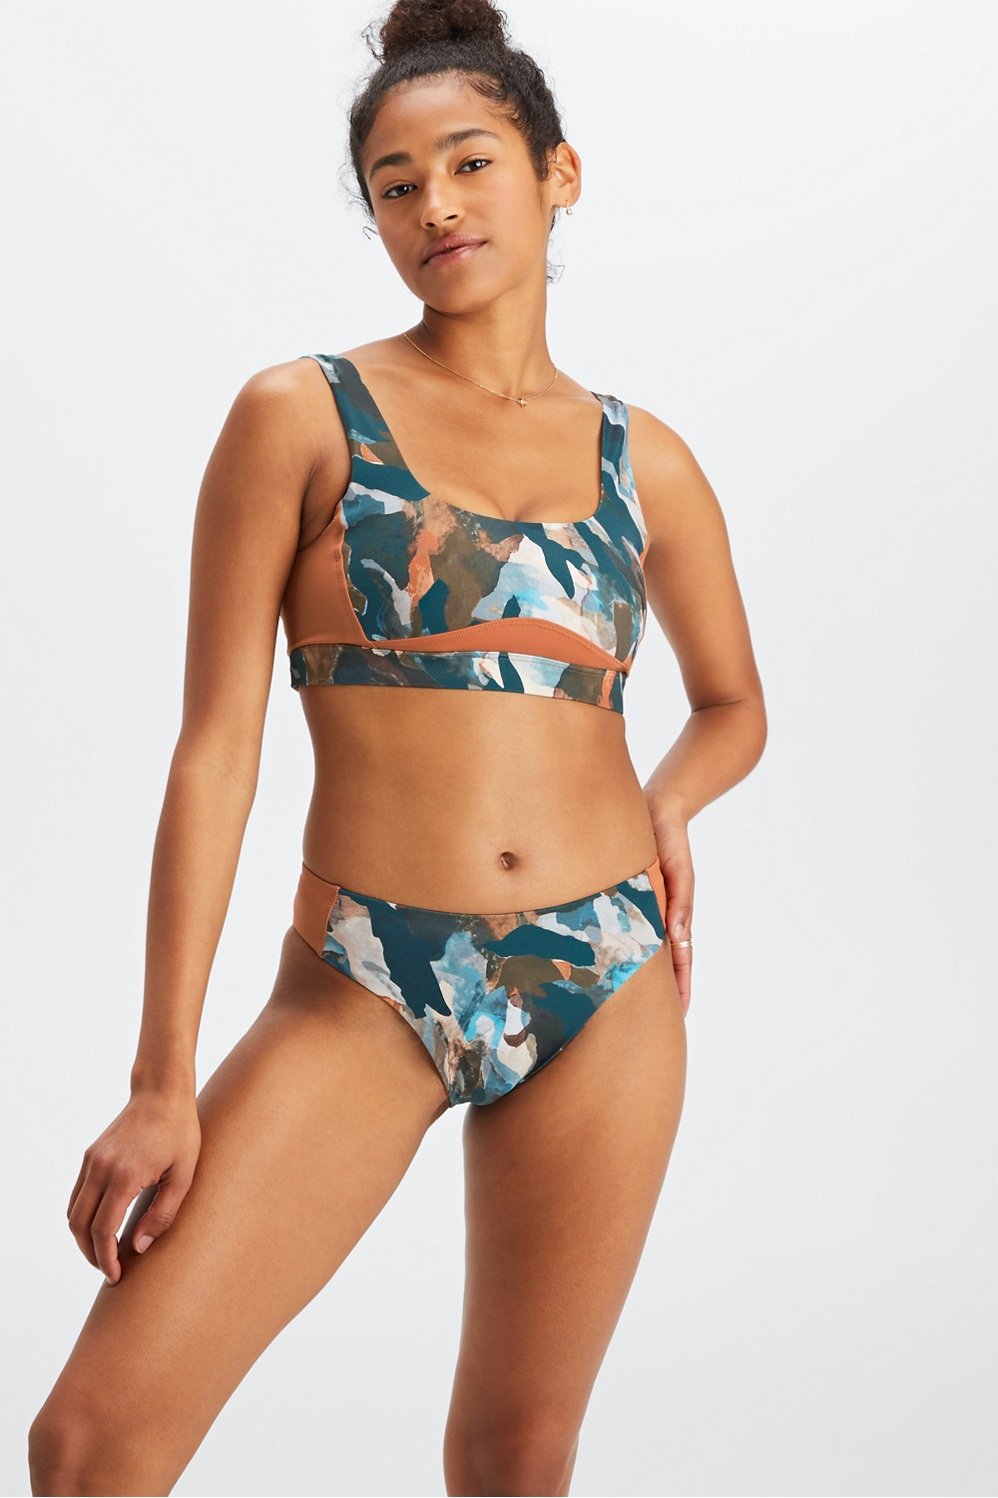 Cuup The Scoop Underwire Bikini Swim Top Fern 15 (38D / 40C / 42B) Size  undefined - $90 New With Tags - From Laura